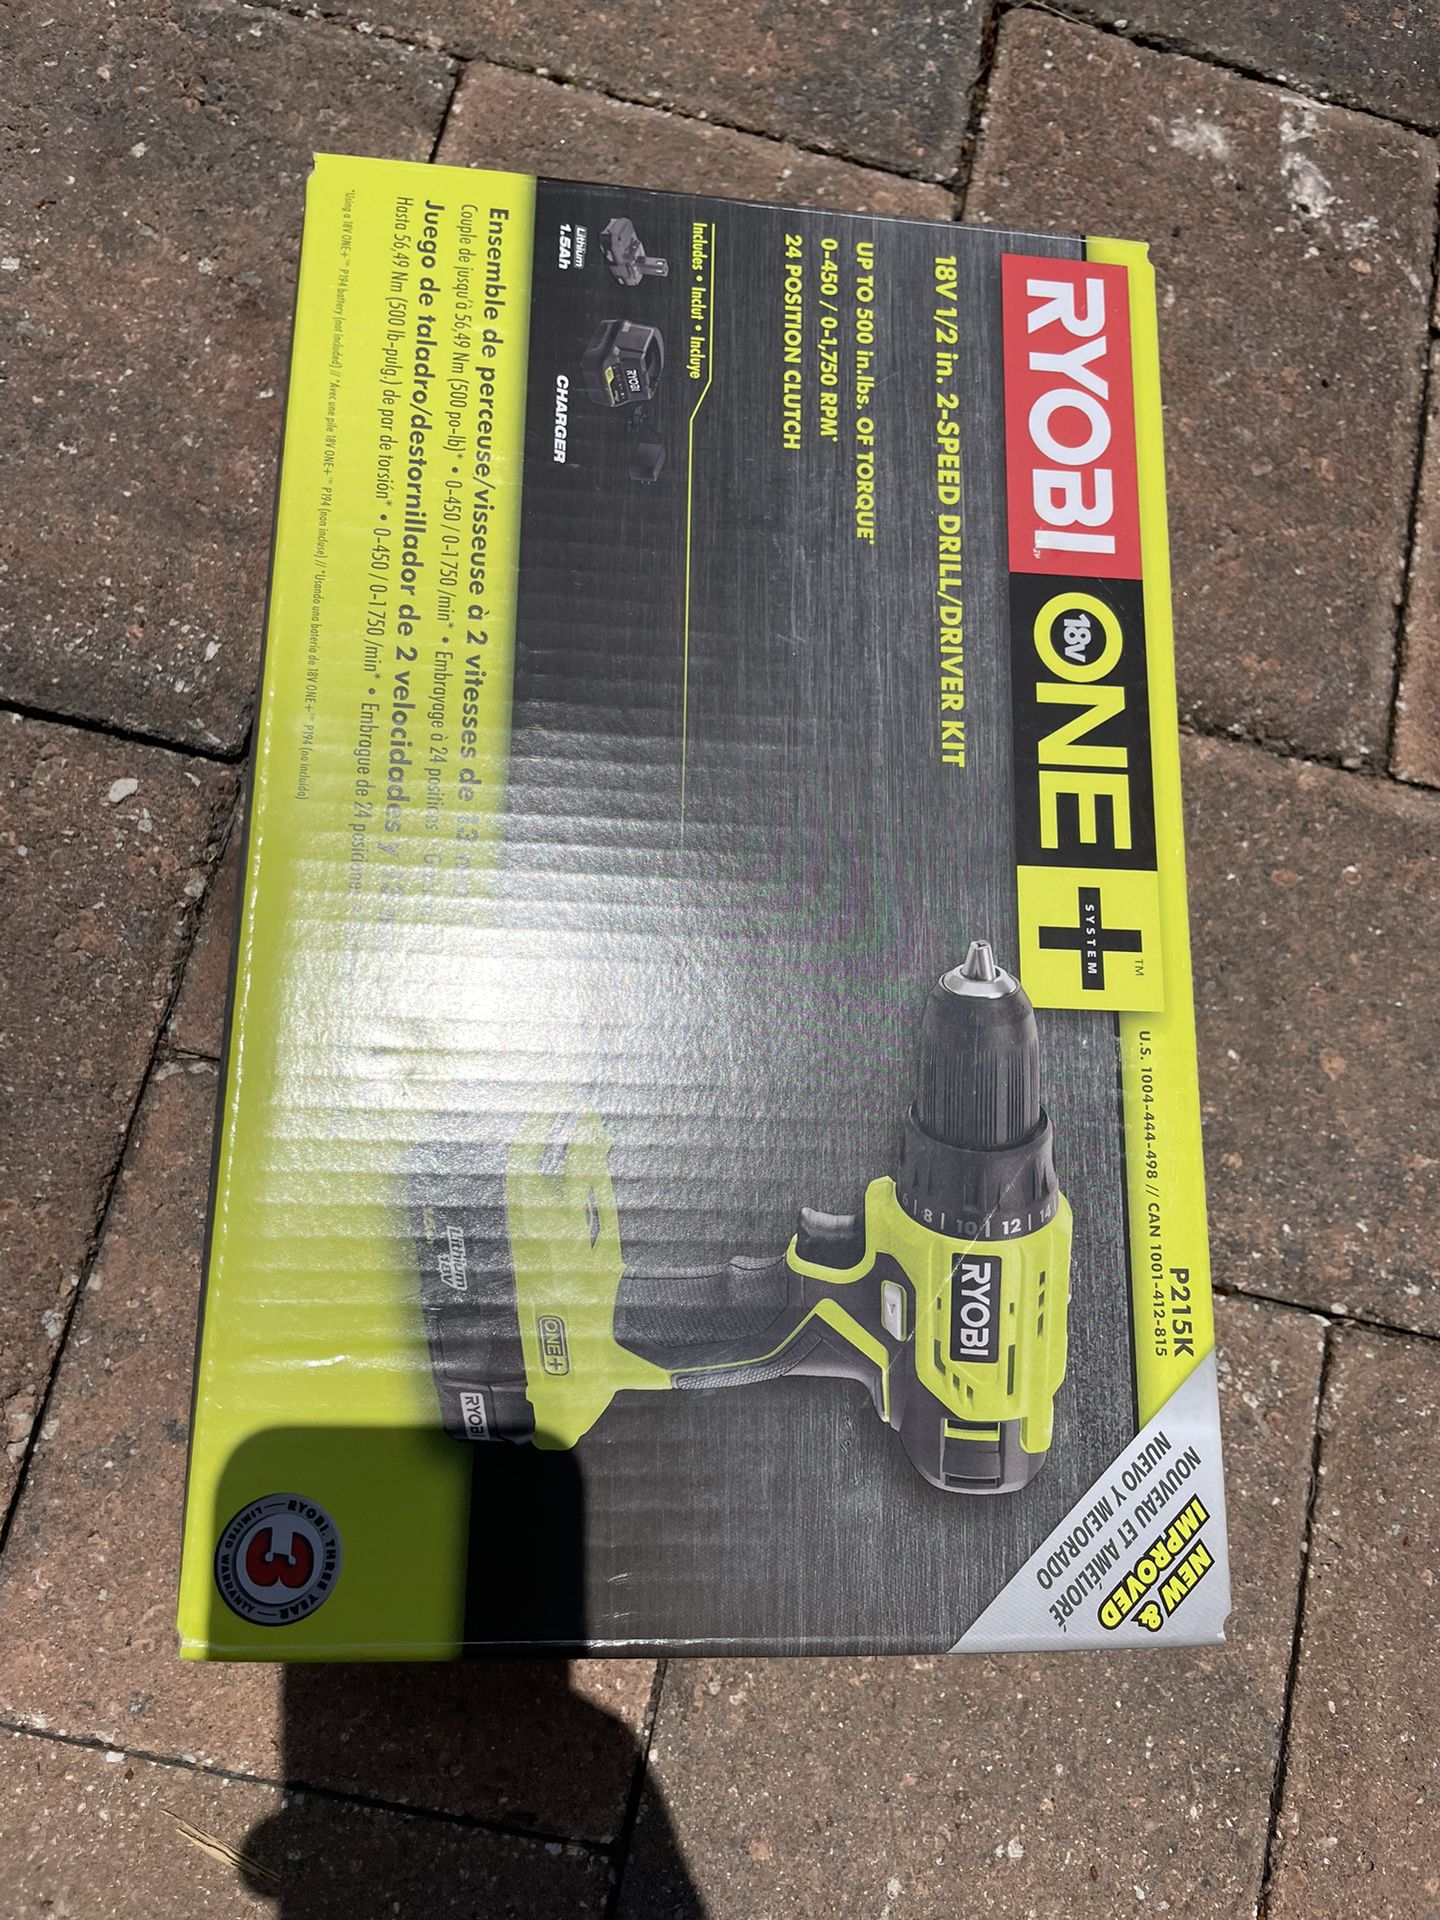 Ryobi Drill With Battery And Charger